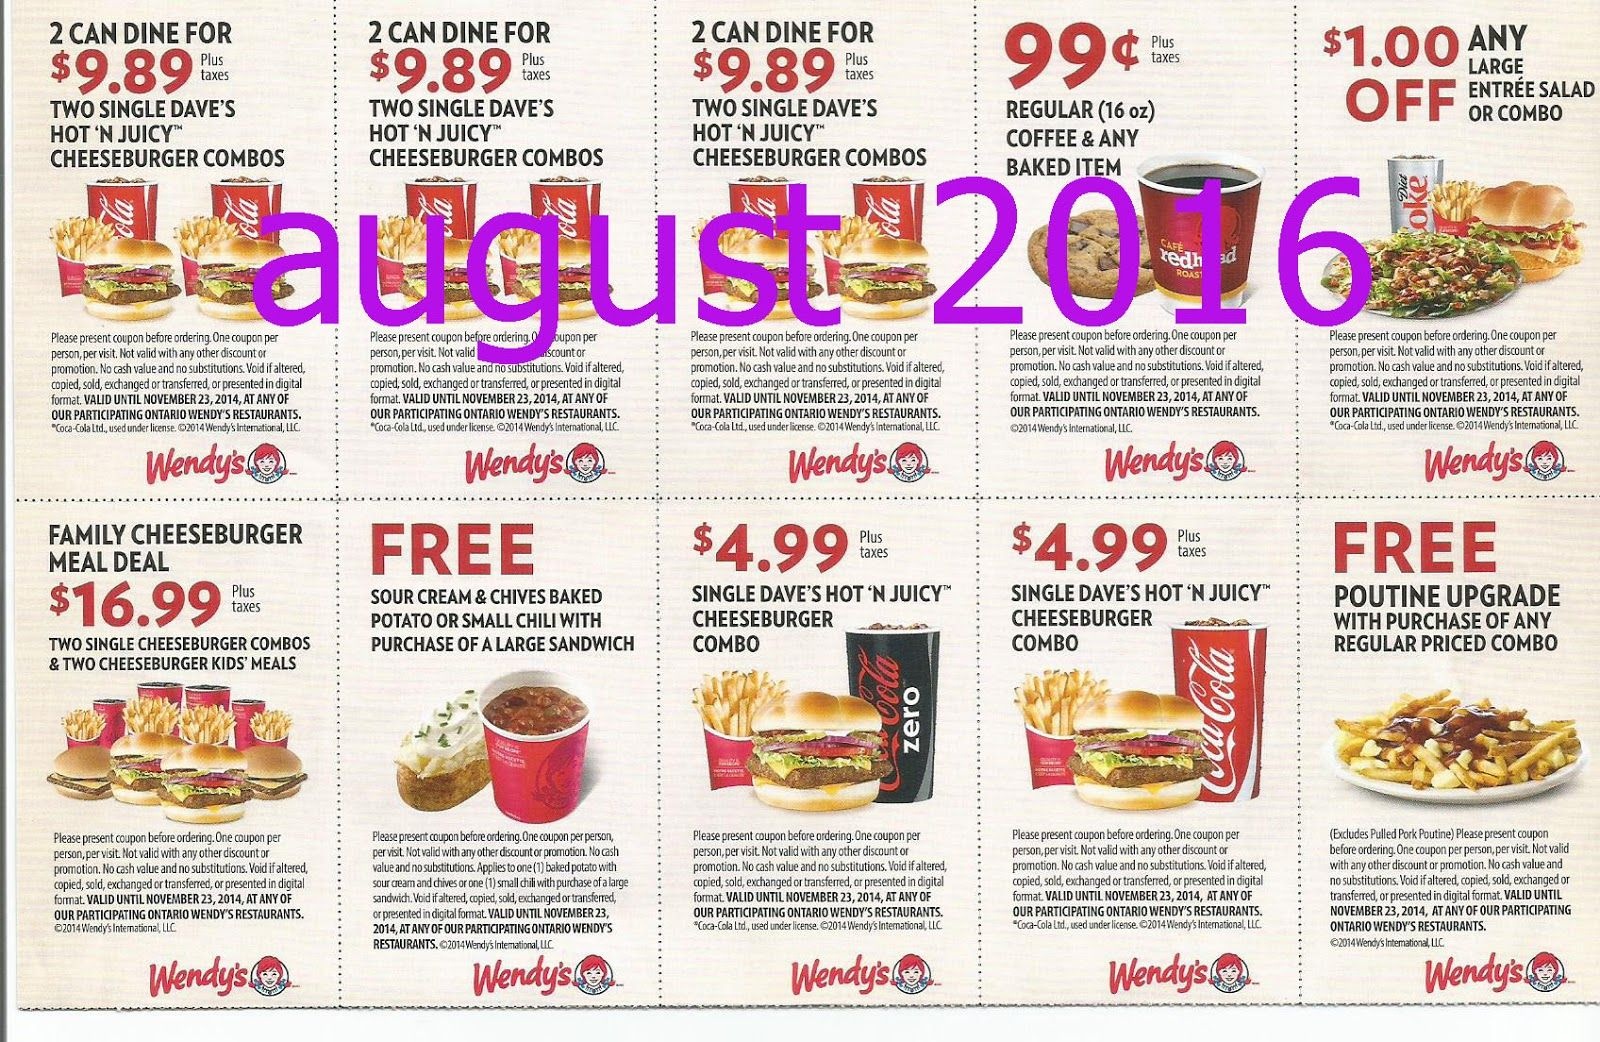 Free Printable Coupons: Wendys Coupons | Fast Food Coupons | Wendys - Free Mcdonalds Smoothie Printable Coupon